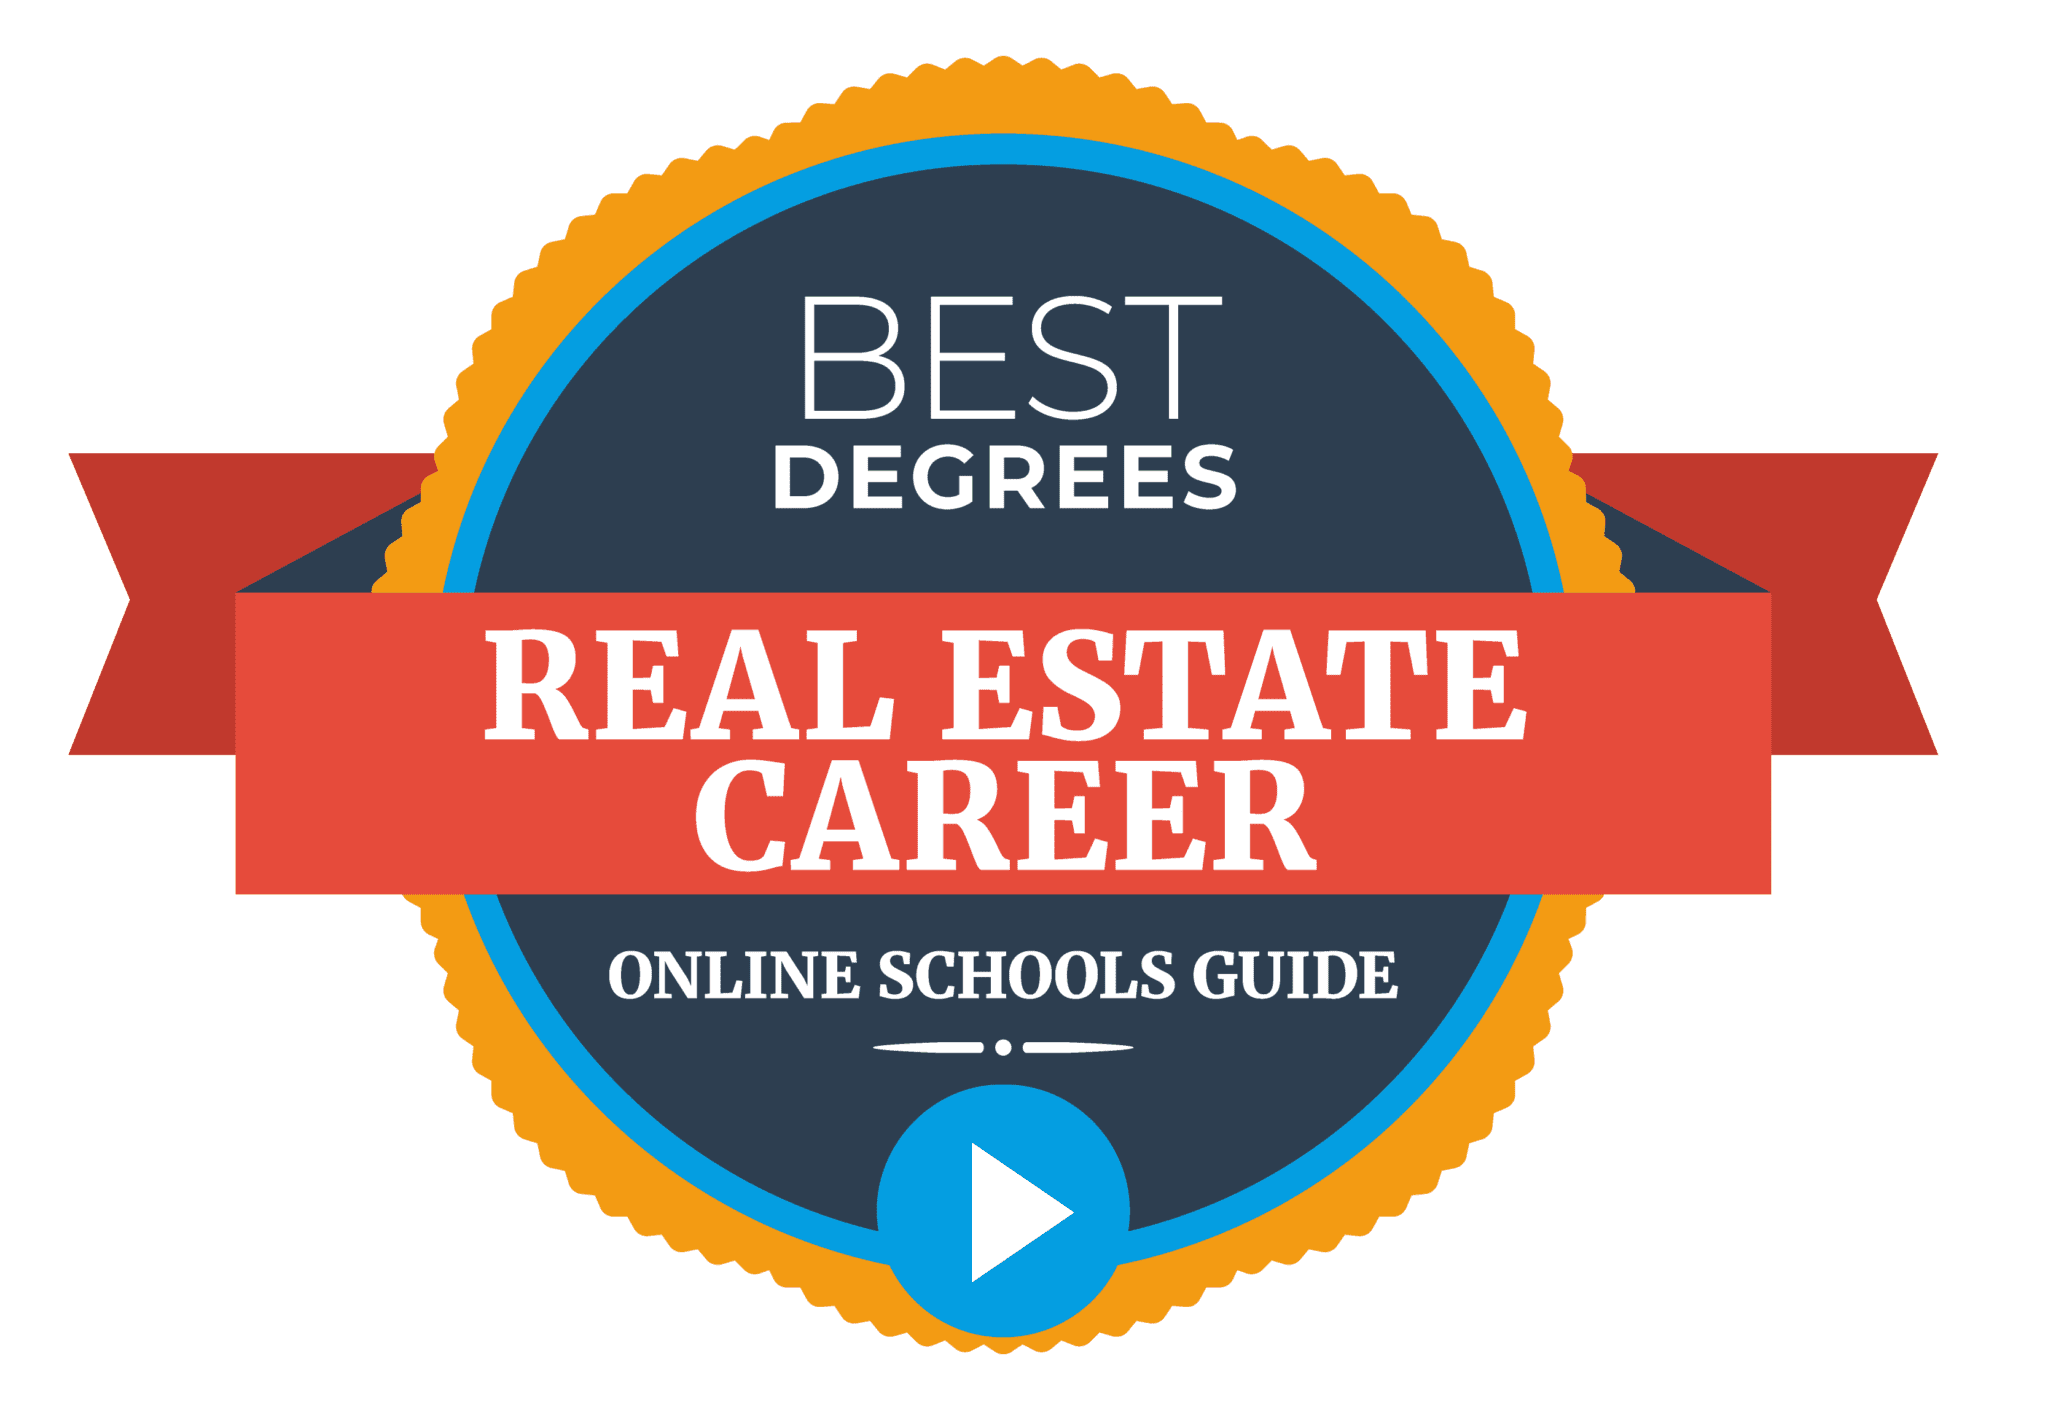 Top 10 Best Degree for Real Estate Careers Online Schools Guide